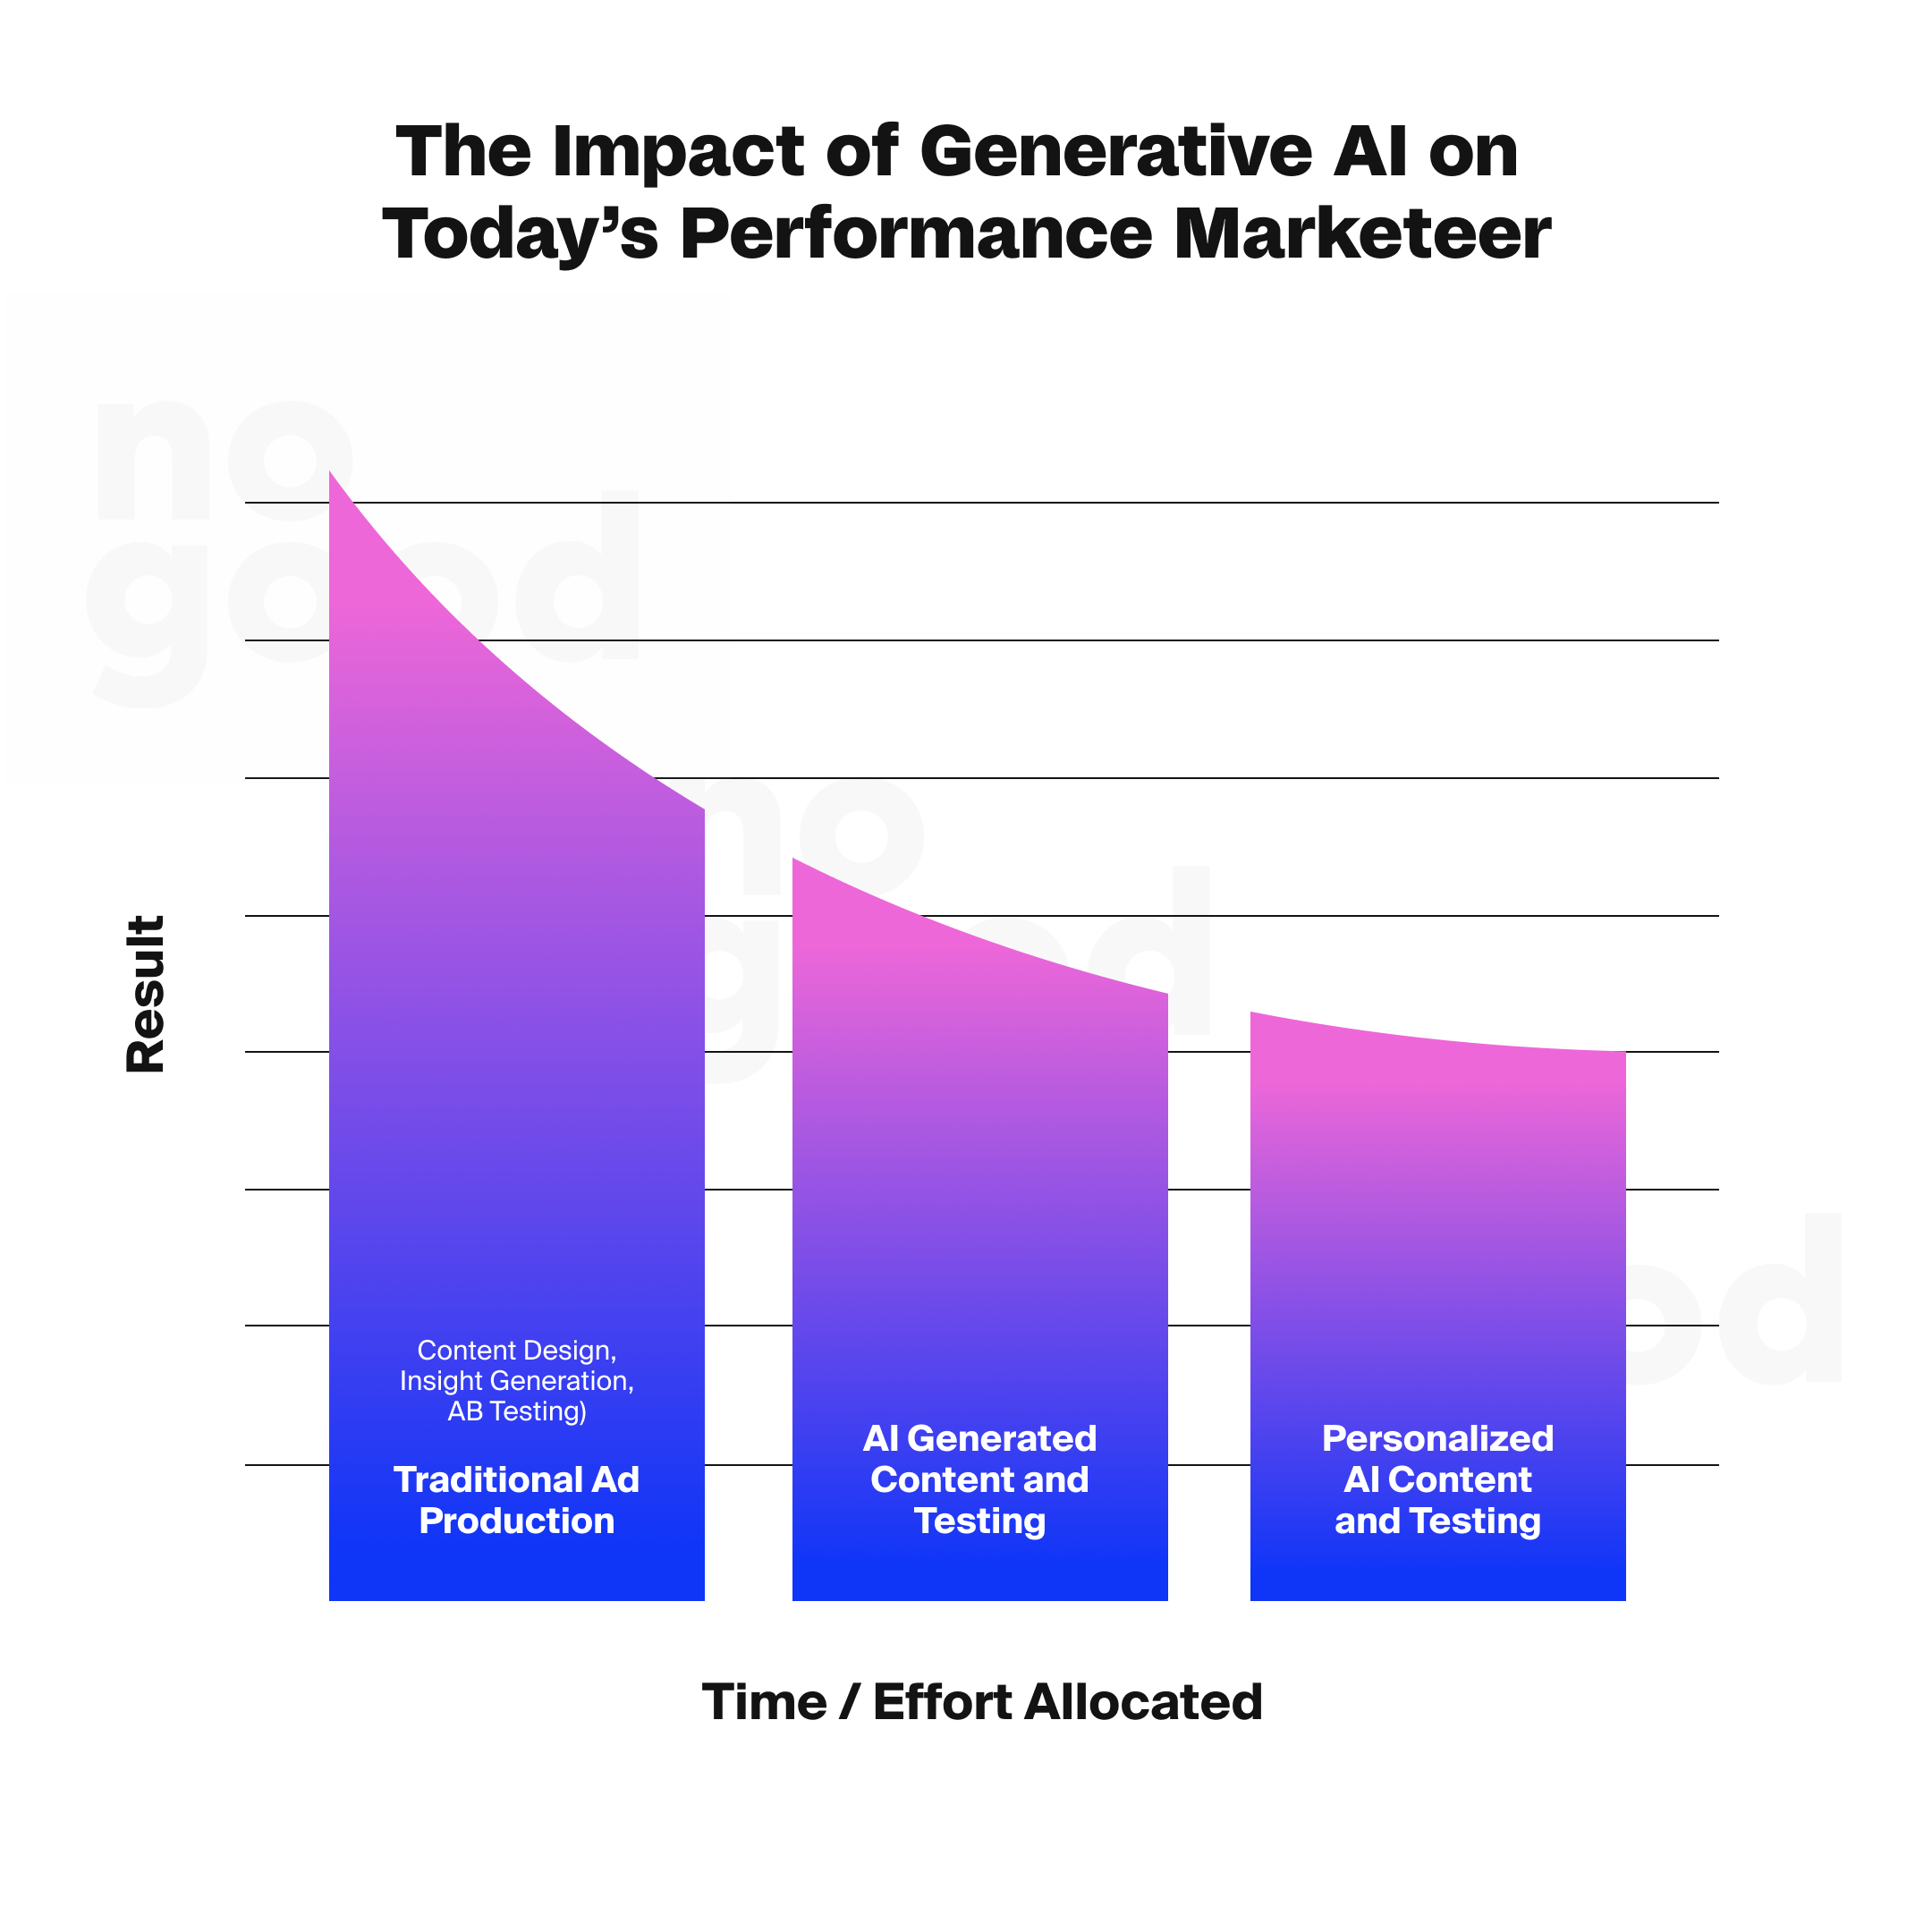 The impact of generative AI on today's performance marketeer